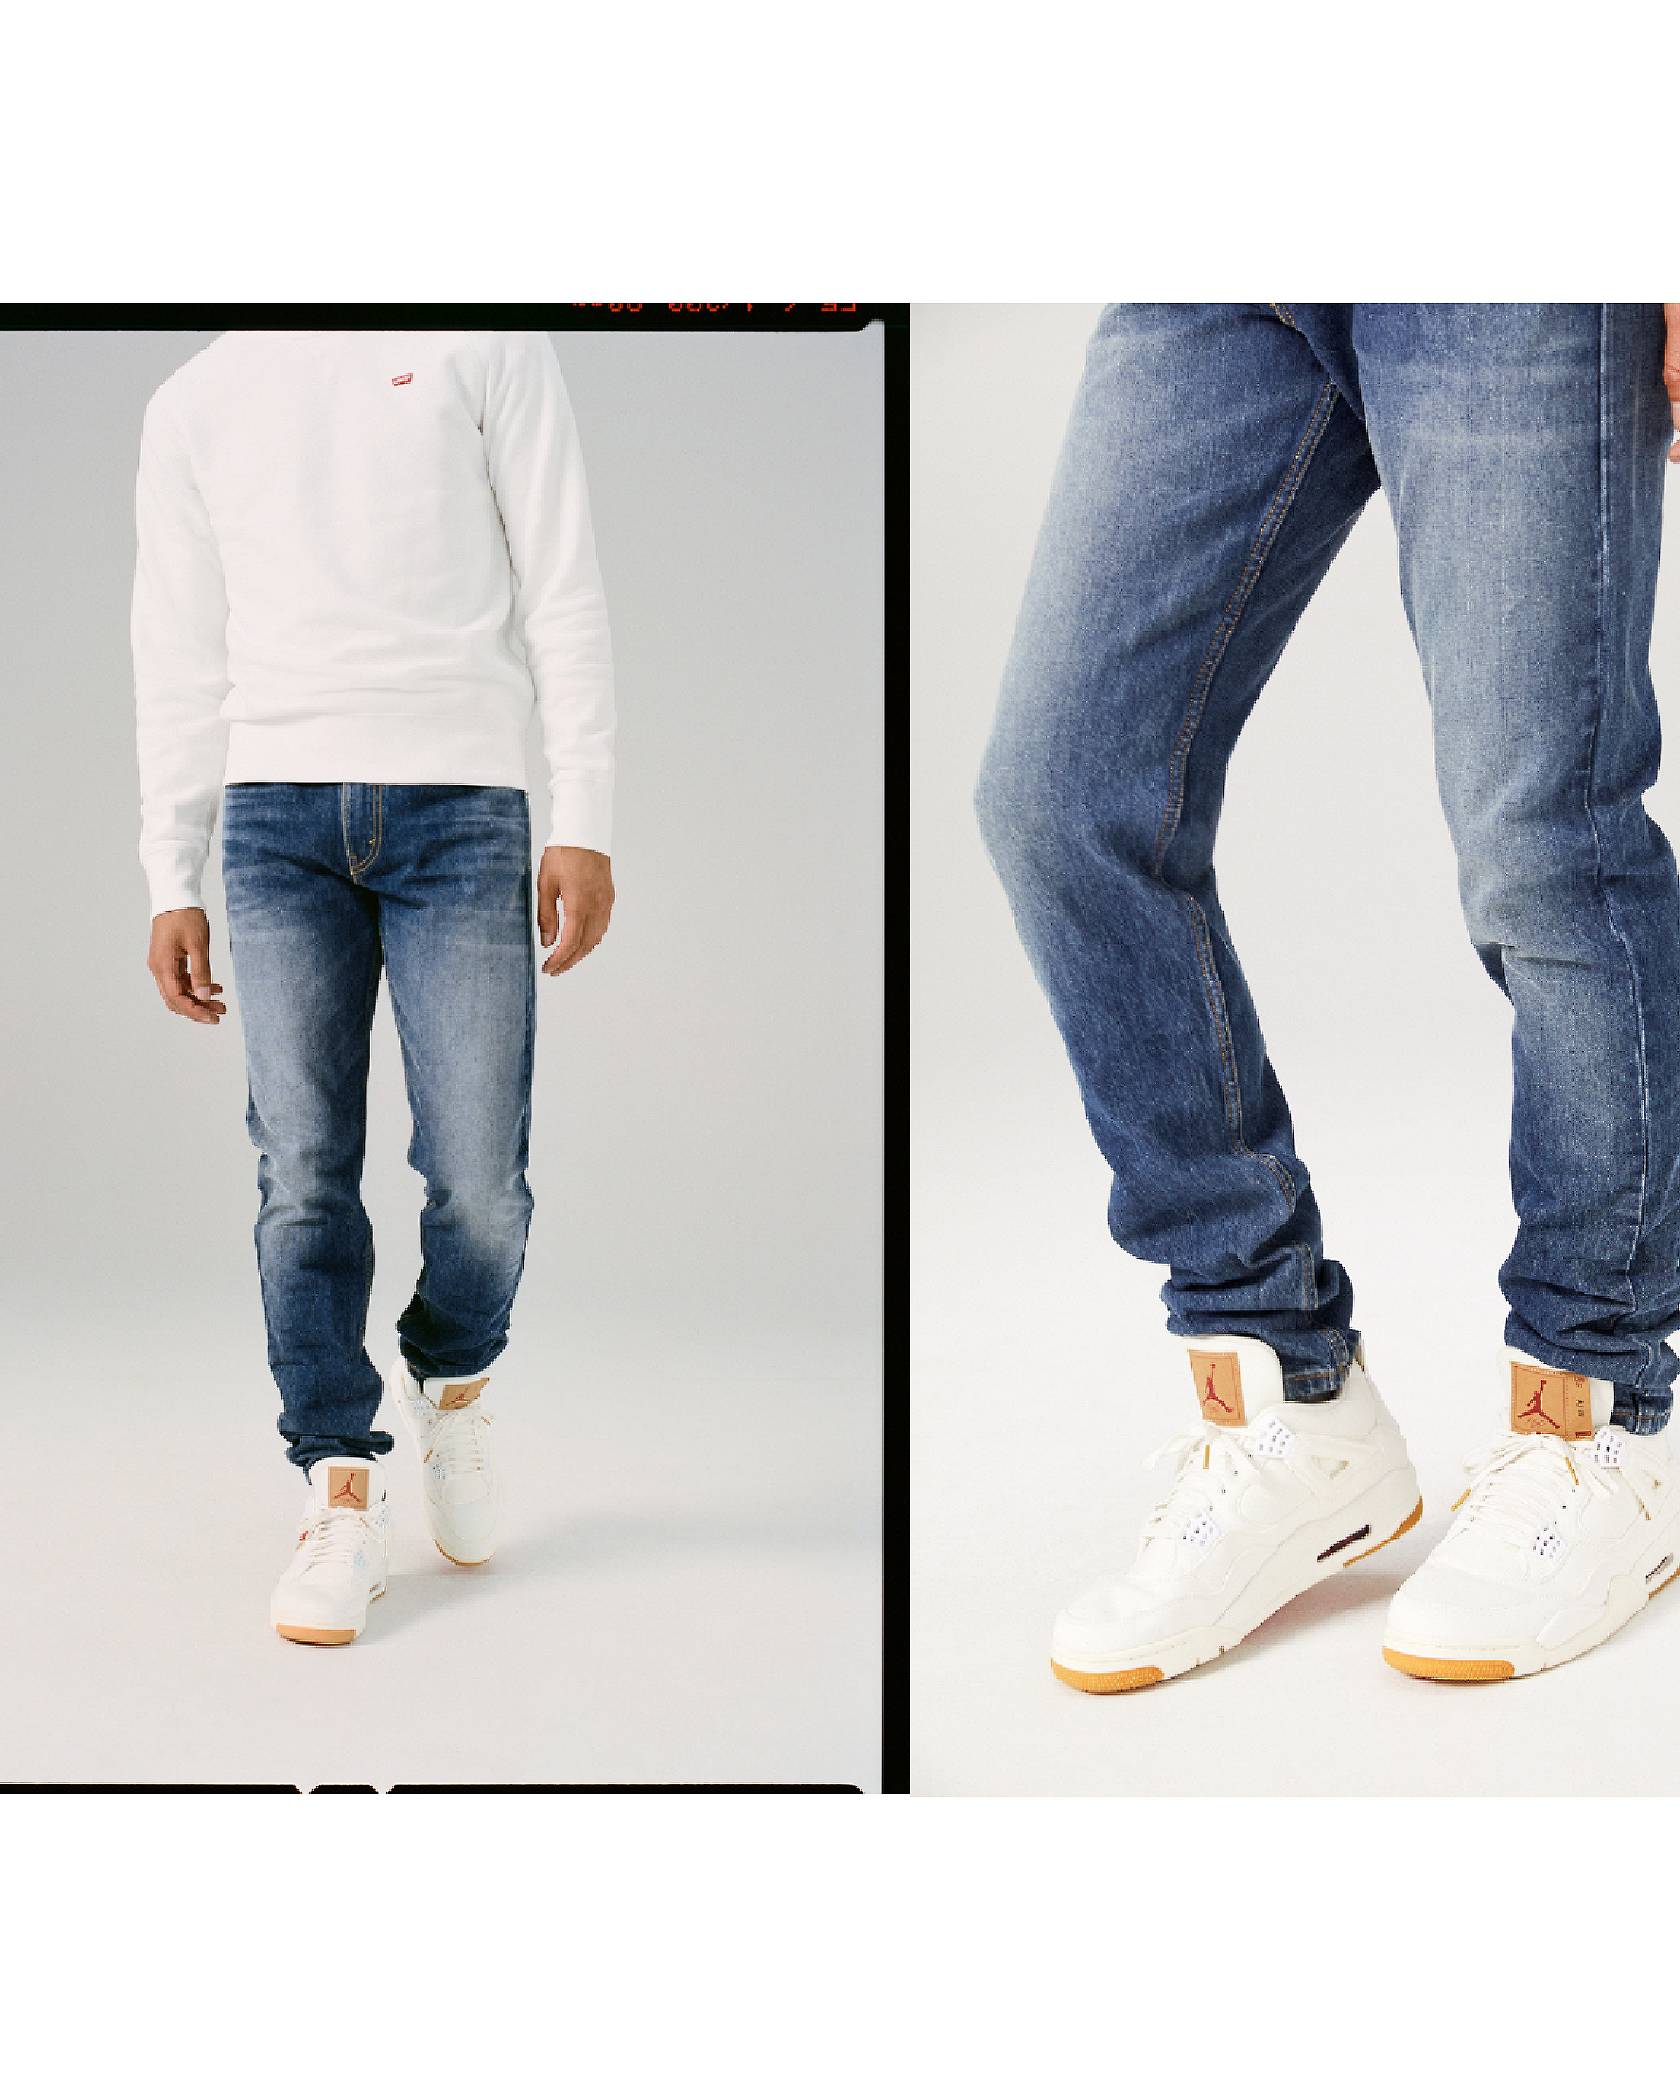 Man modeling the lo-ball stack jeans.